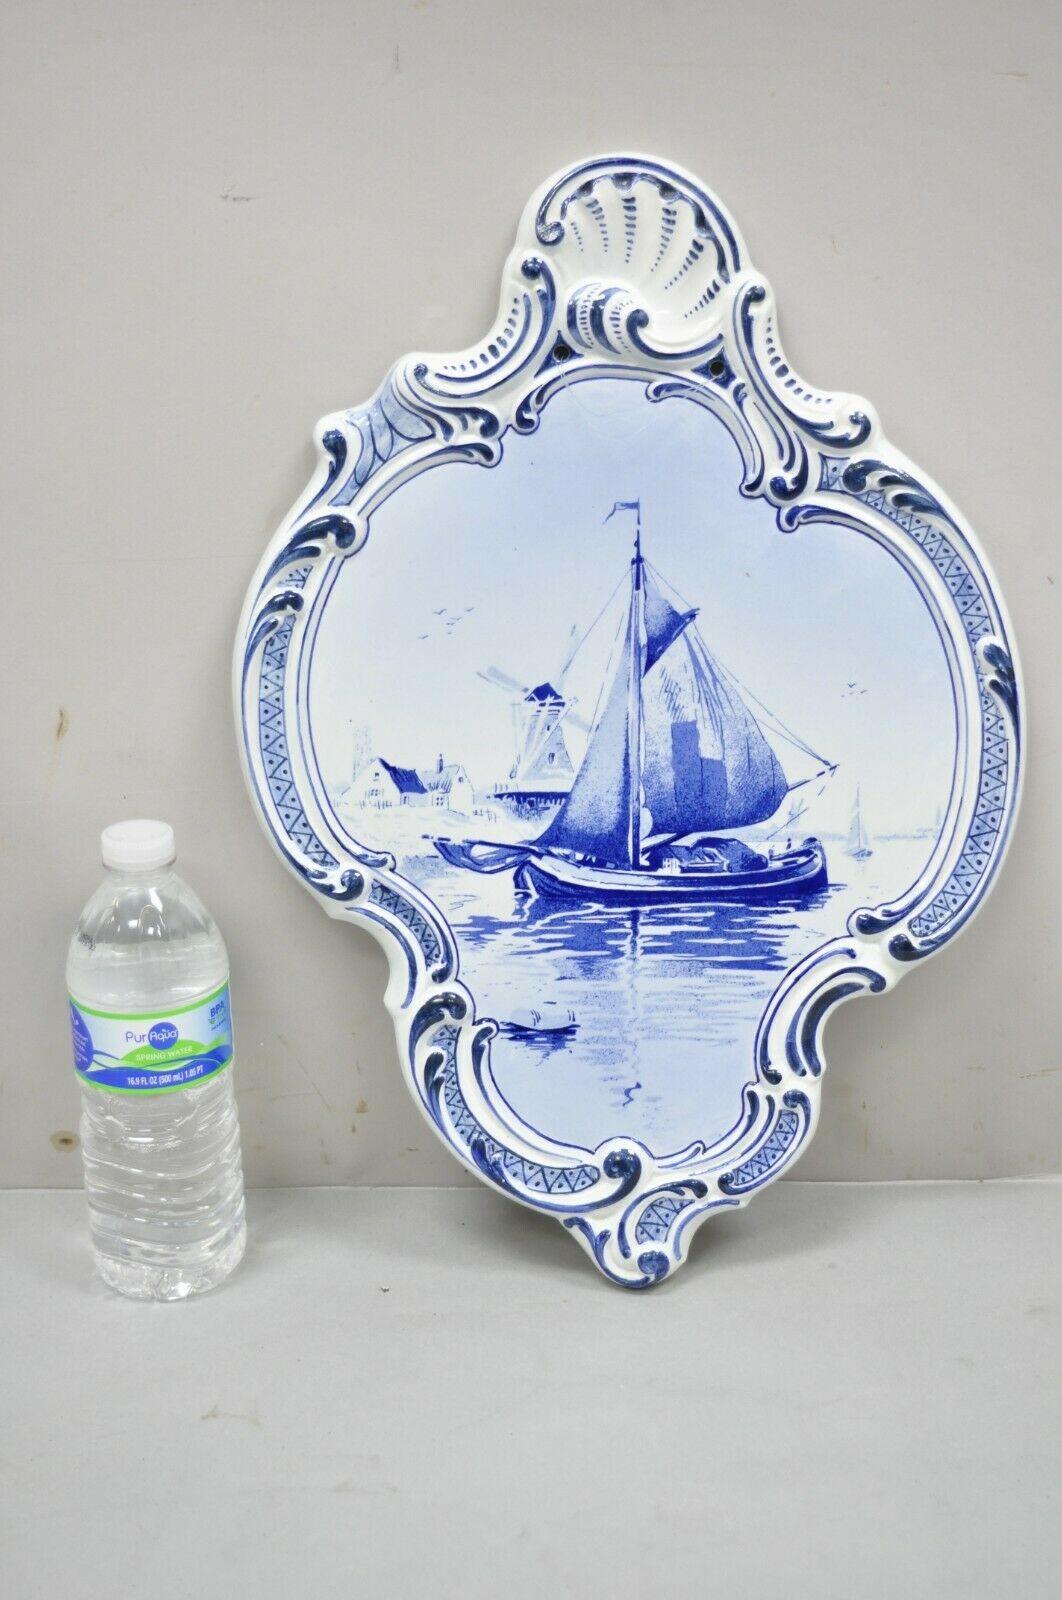 Delft Blue Boch Freres La Louviere Porcelain Ship Wall Charger Plate. Item features a blue and white color, central ship design, shaped boarder, holes for wall hanging. Circa Mid to Late 20th Century. Measurements: 18